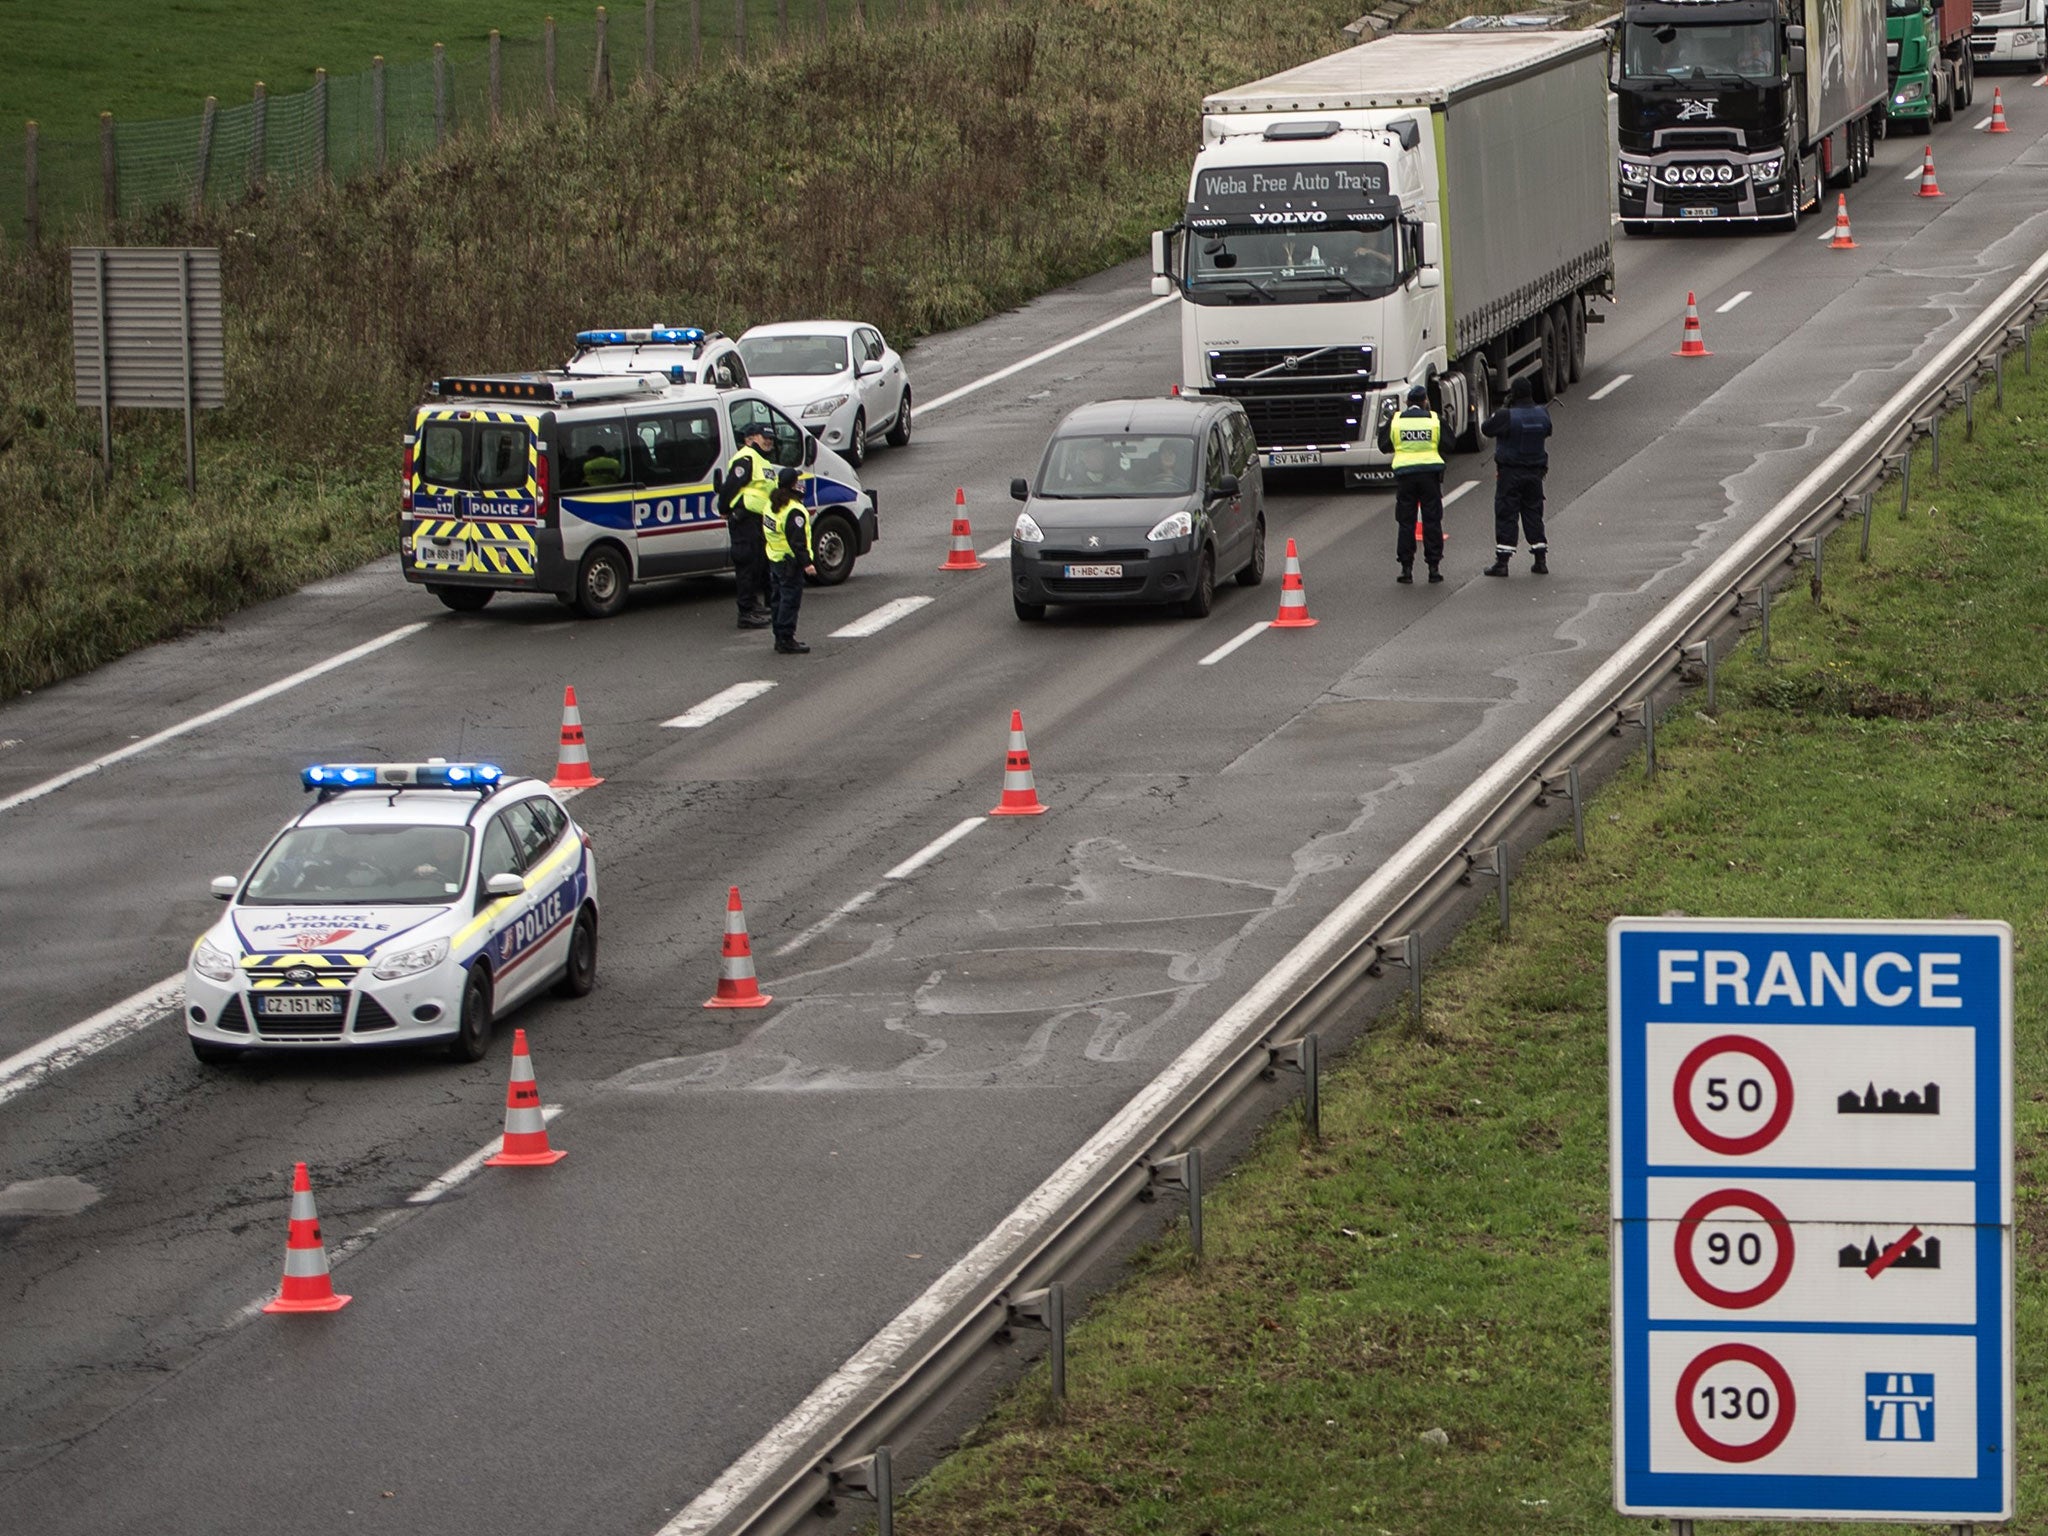 Belgium and France have re-established border controls since the Paris attacks